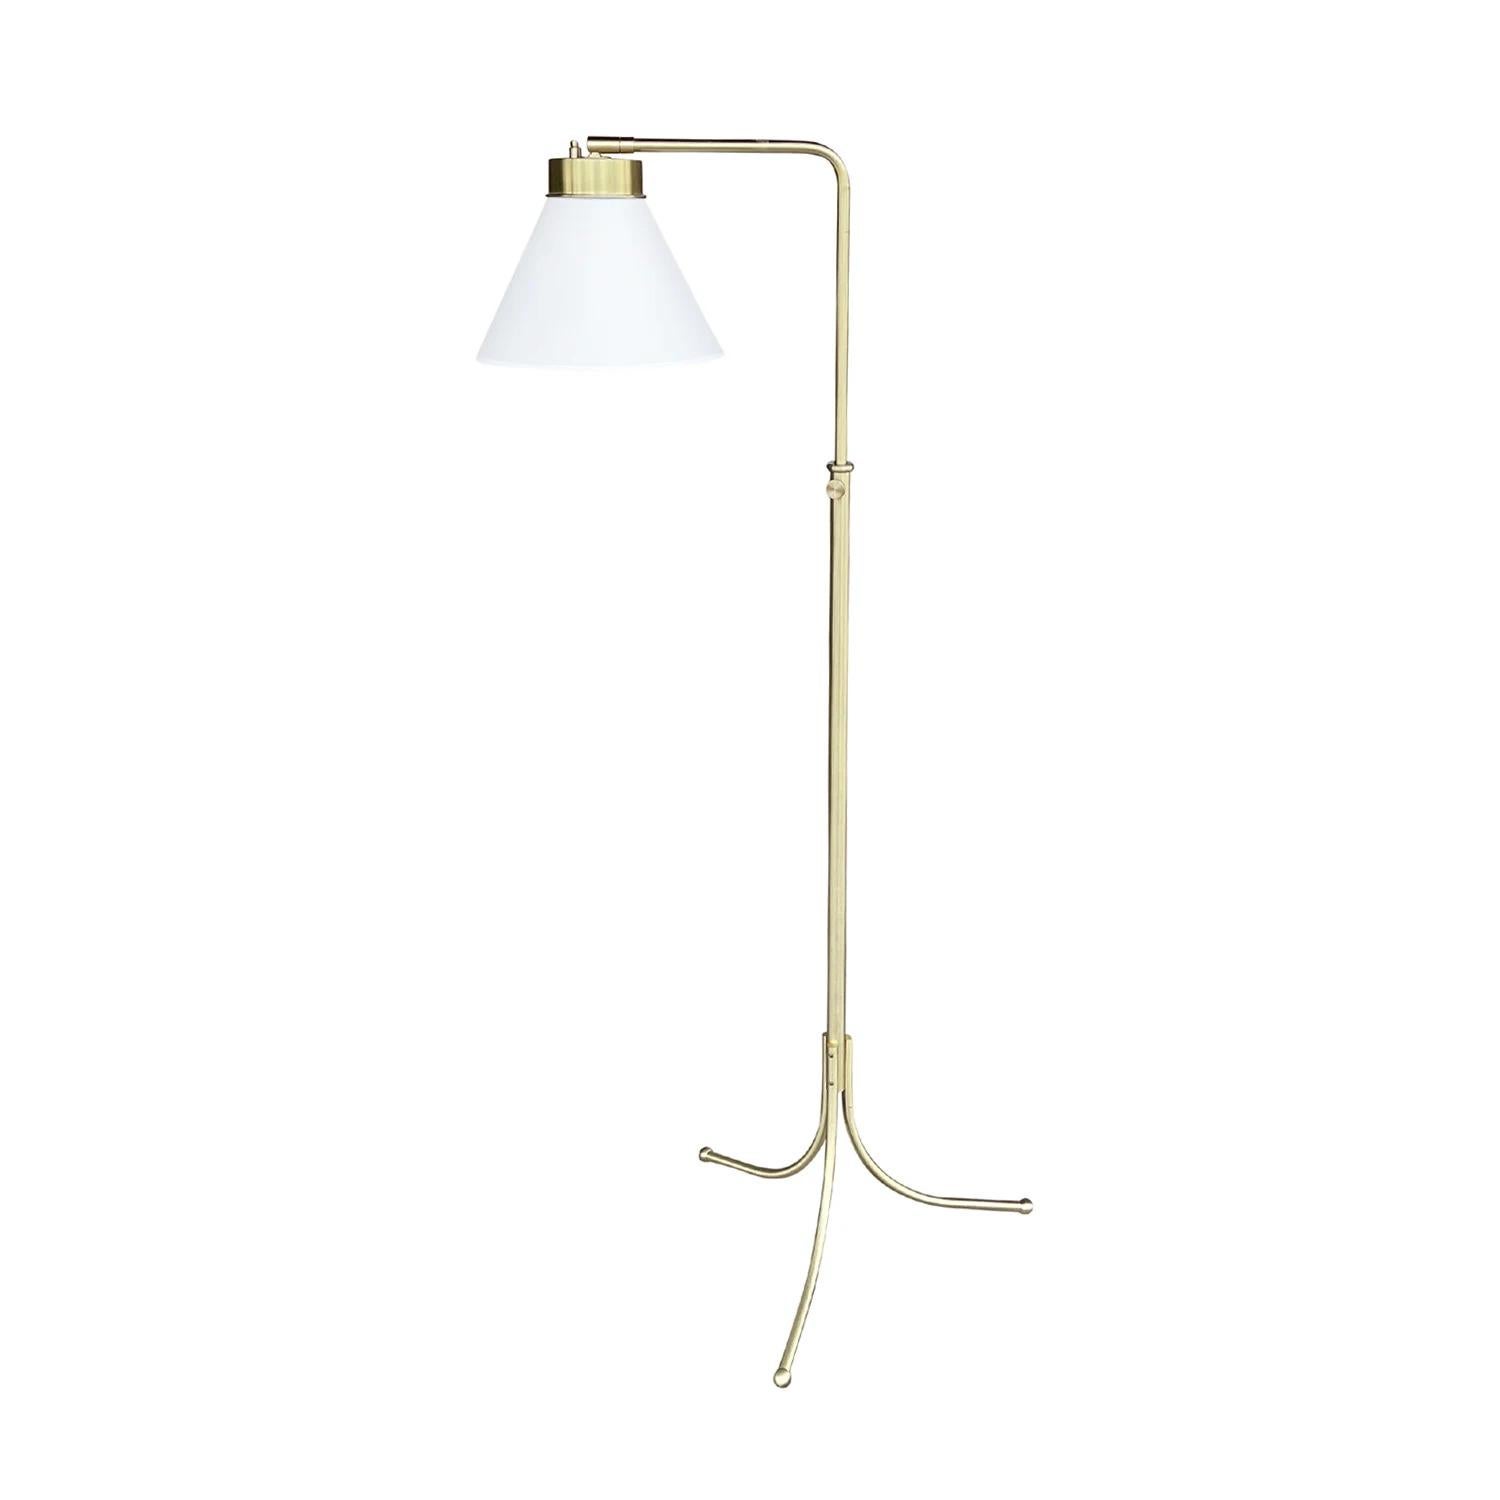 A vintage Mid-Century Modern Swedish reading floor lamp with a new white round shade made of hand crafted polished brass, composed with its original light switch, designed by Josef Frank and produced by Svenskt Tenn in good condition. The shade of